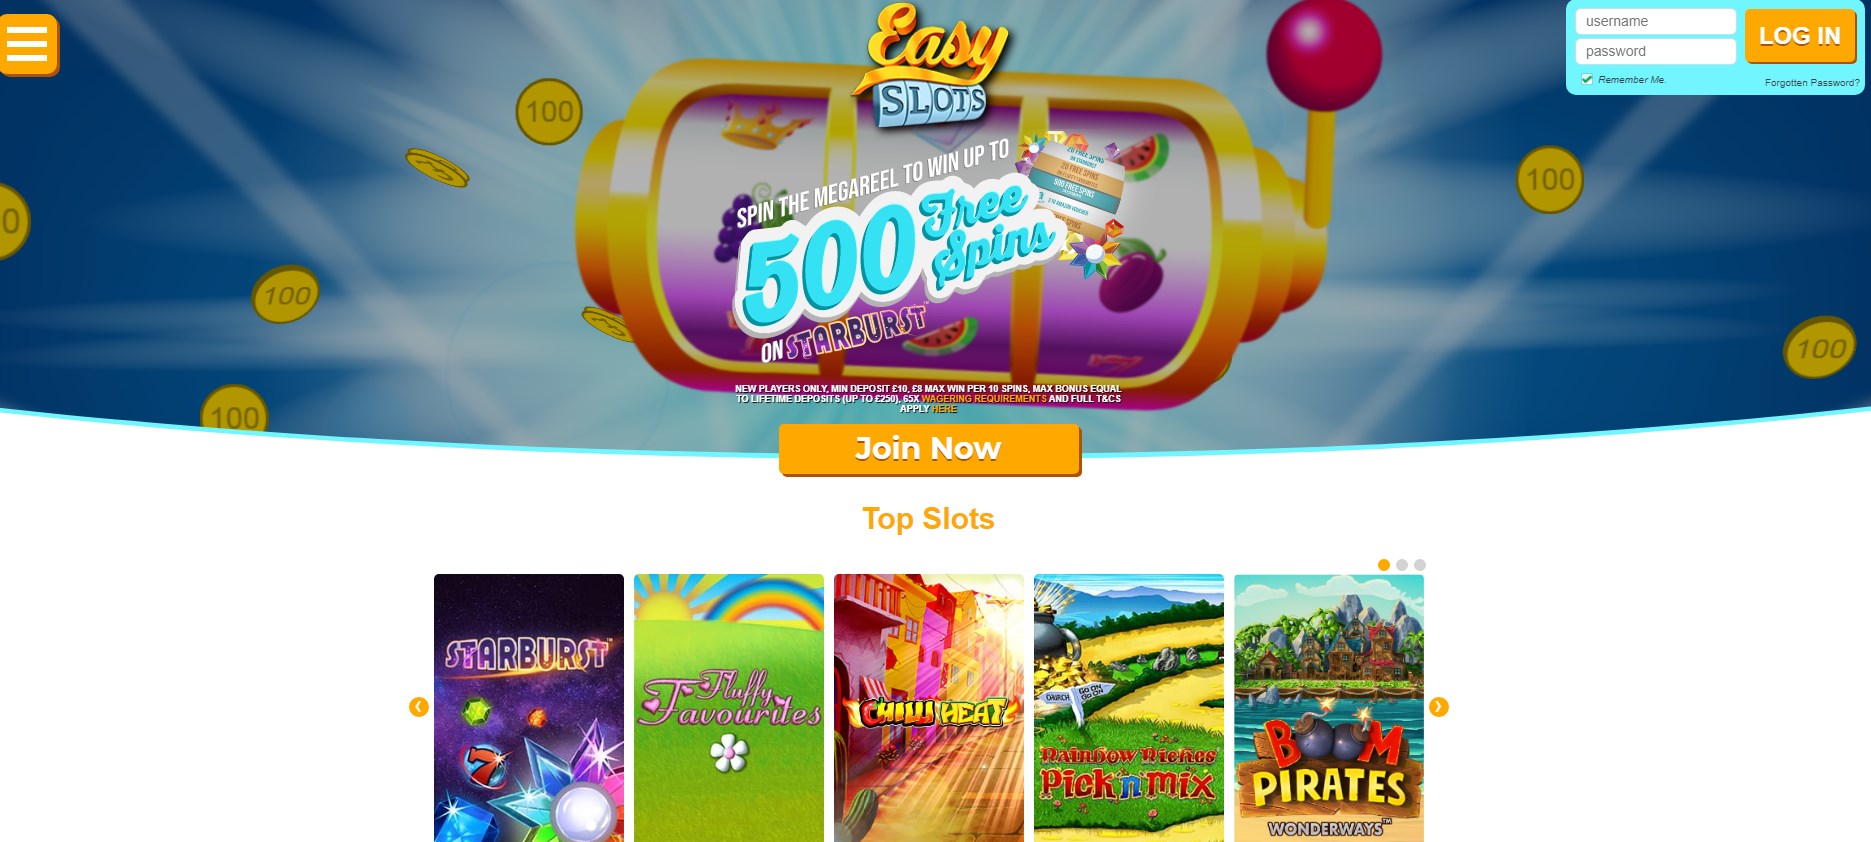 Easy Slots Casino Review